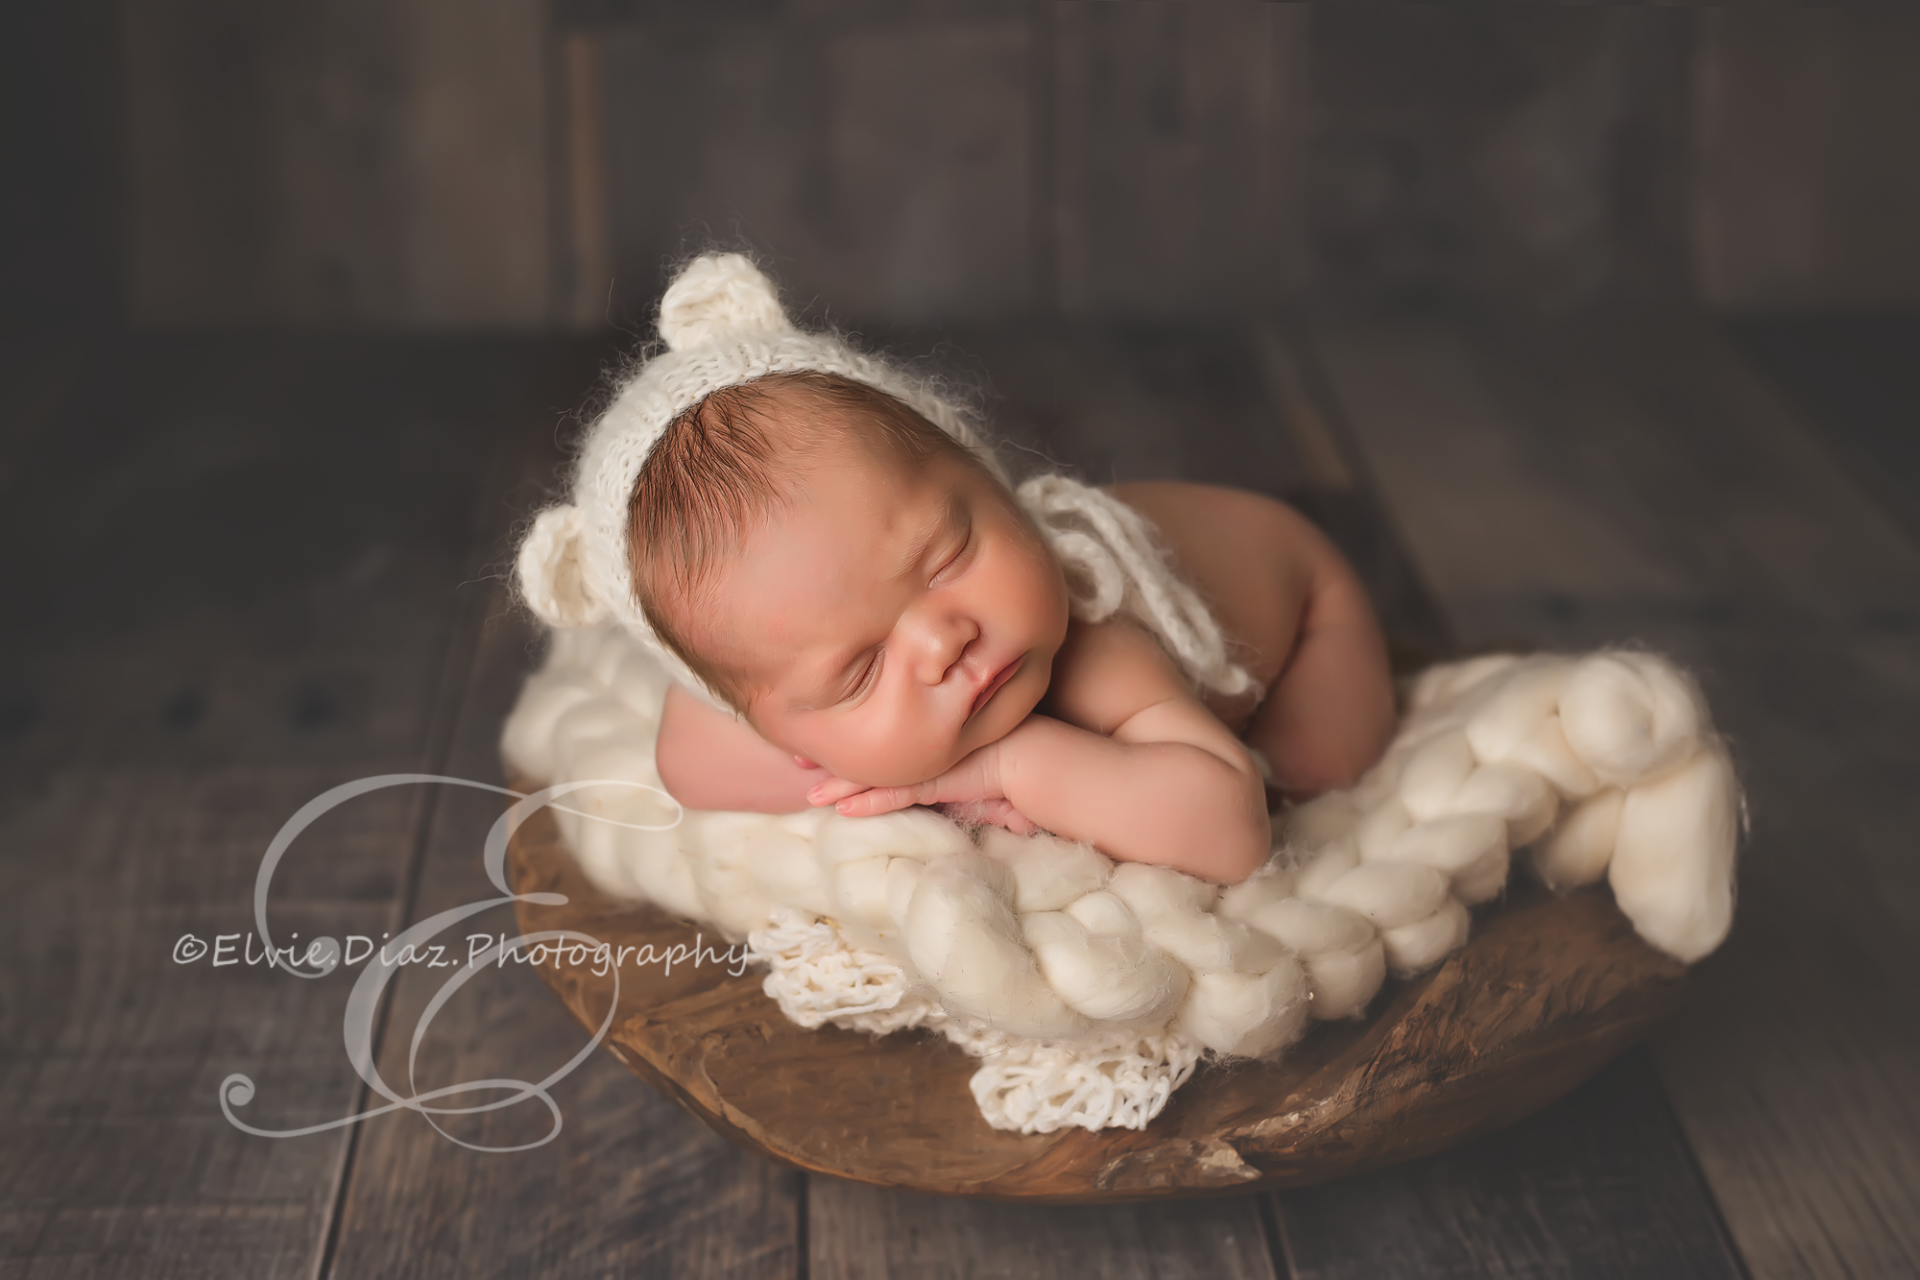 Baby Noah came to visit (Chicago Newborn Photographer)